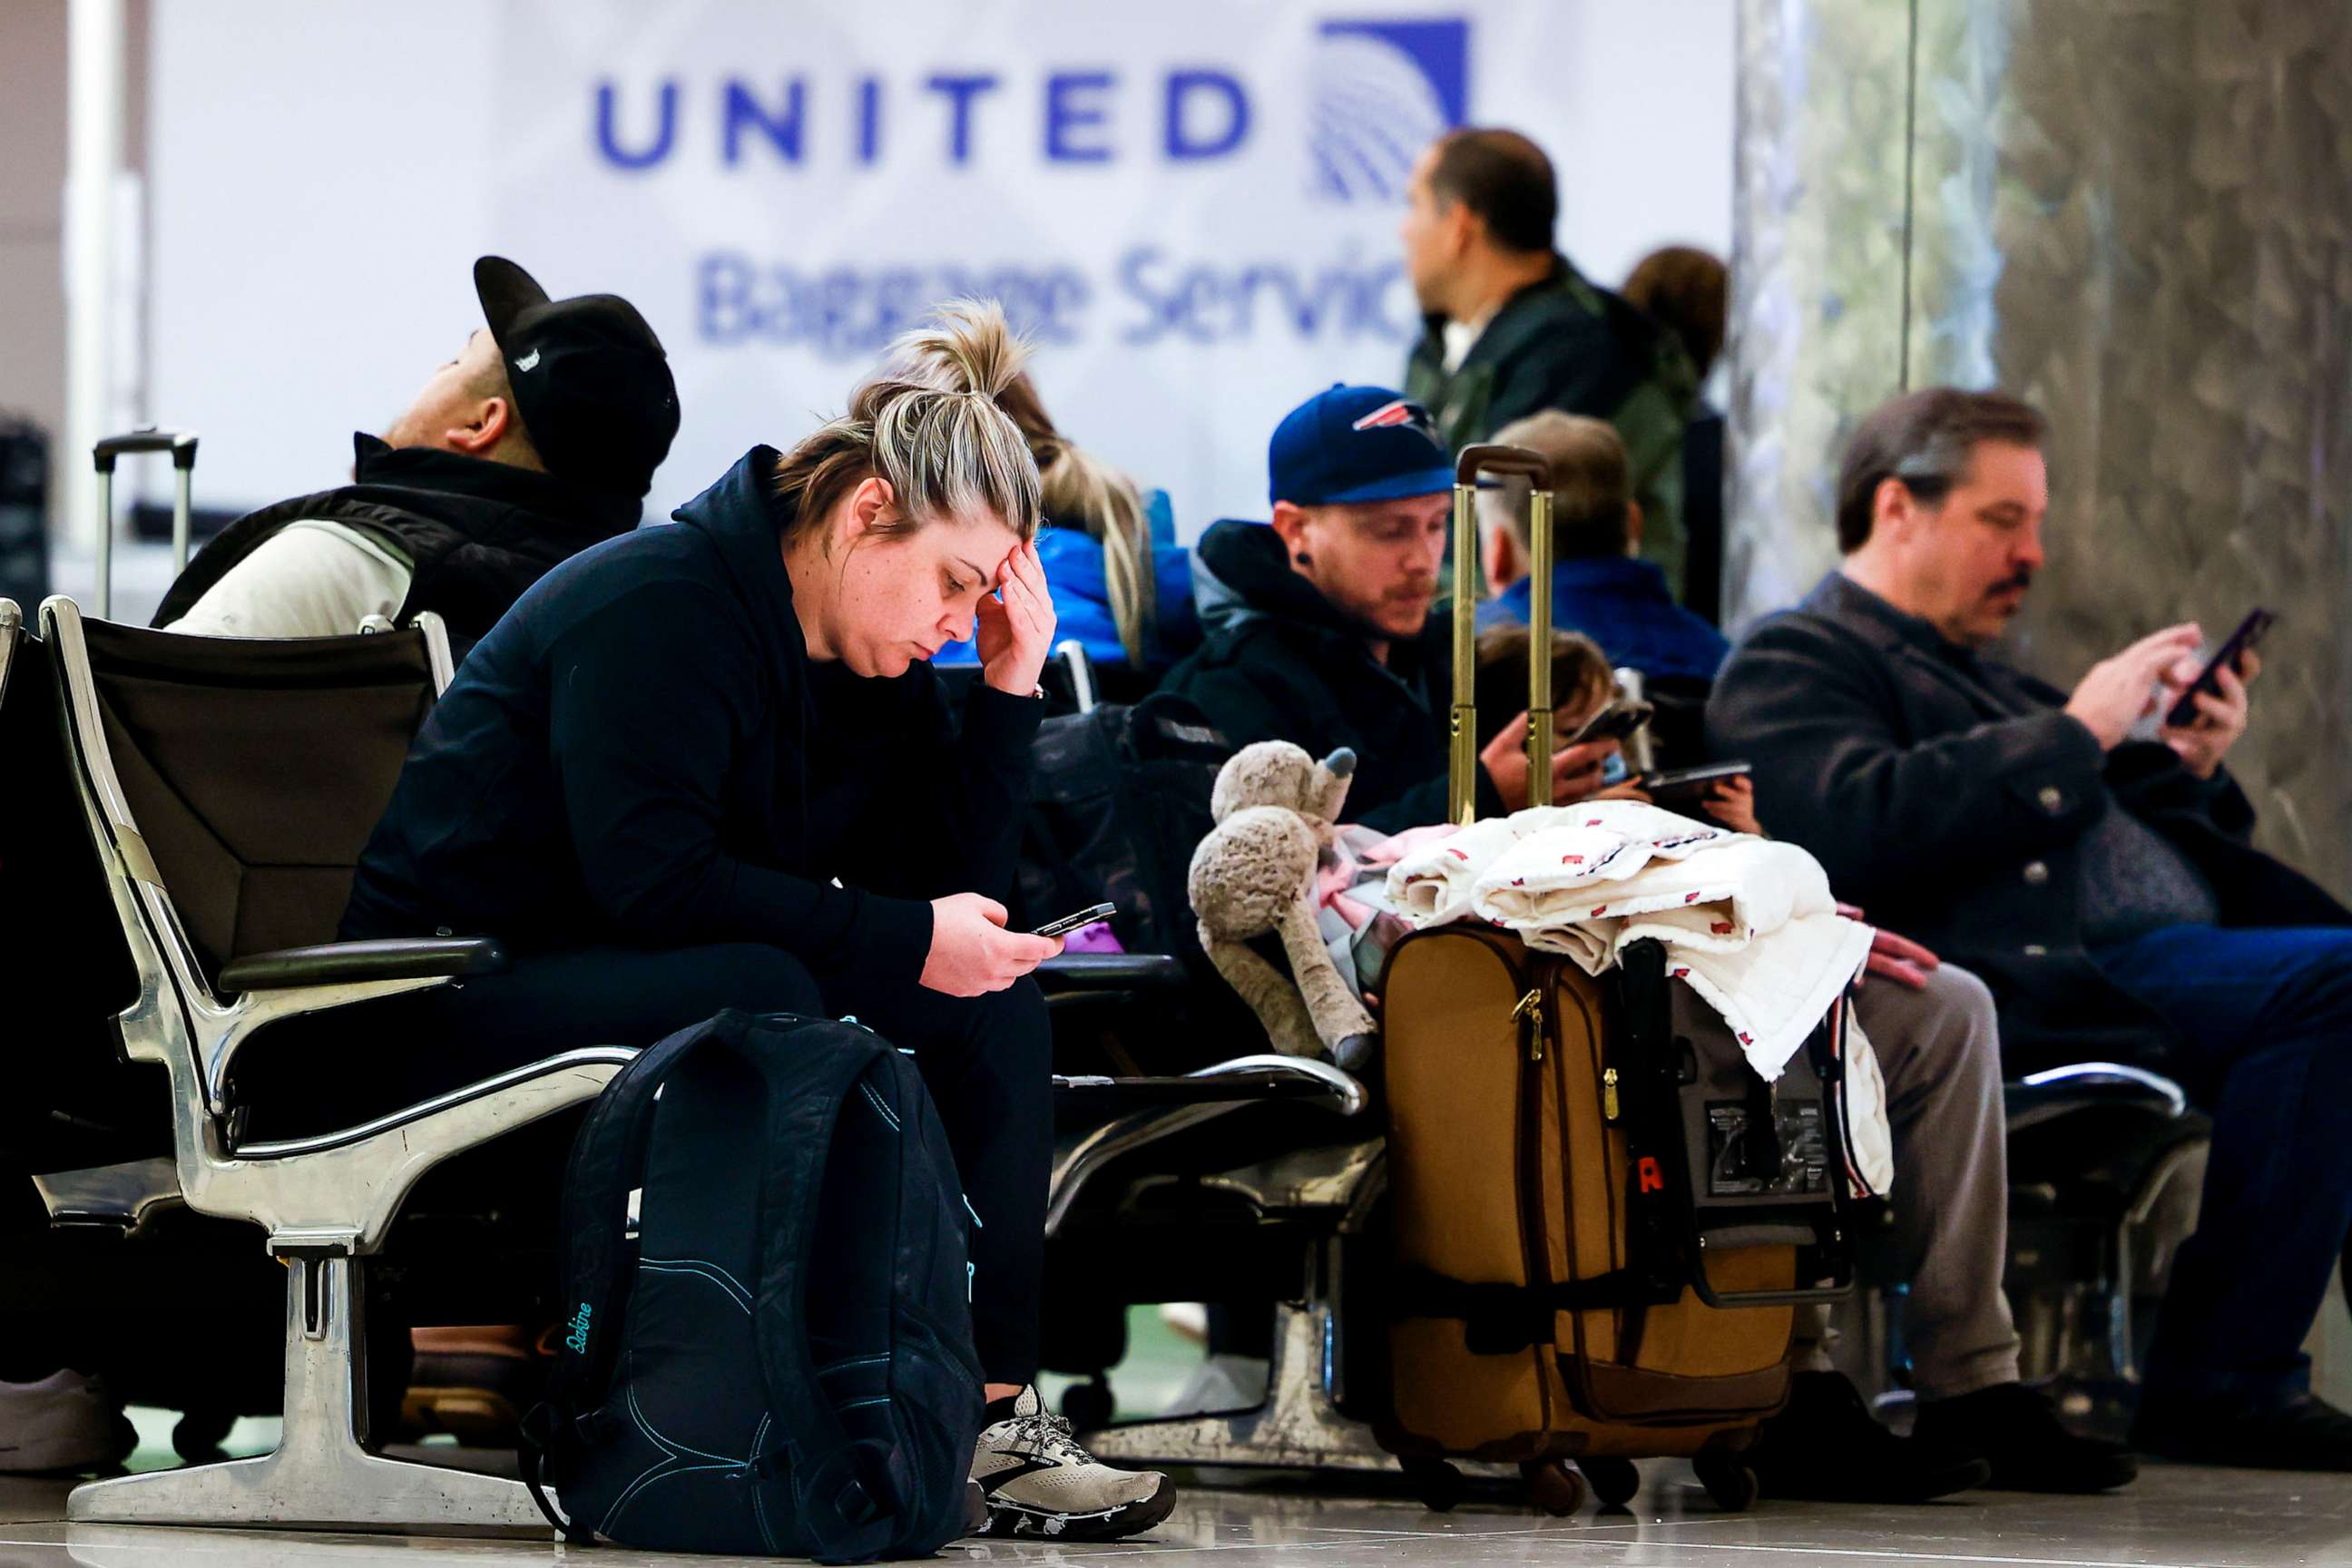 PHOTO: People sit at Denver International Airport amidst a wave of flight cancelations due to a winter storm, Feb. 22, 2023, in Denver.